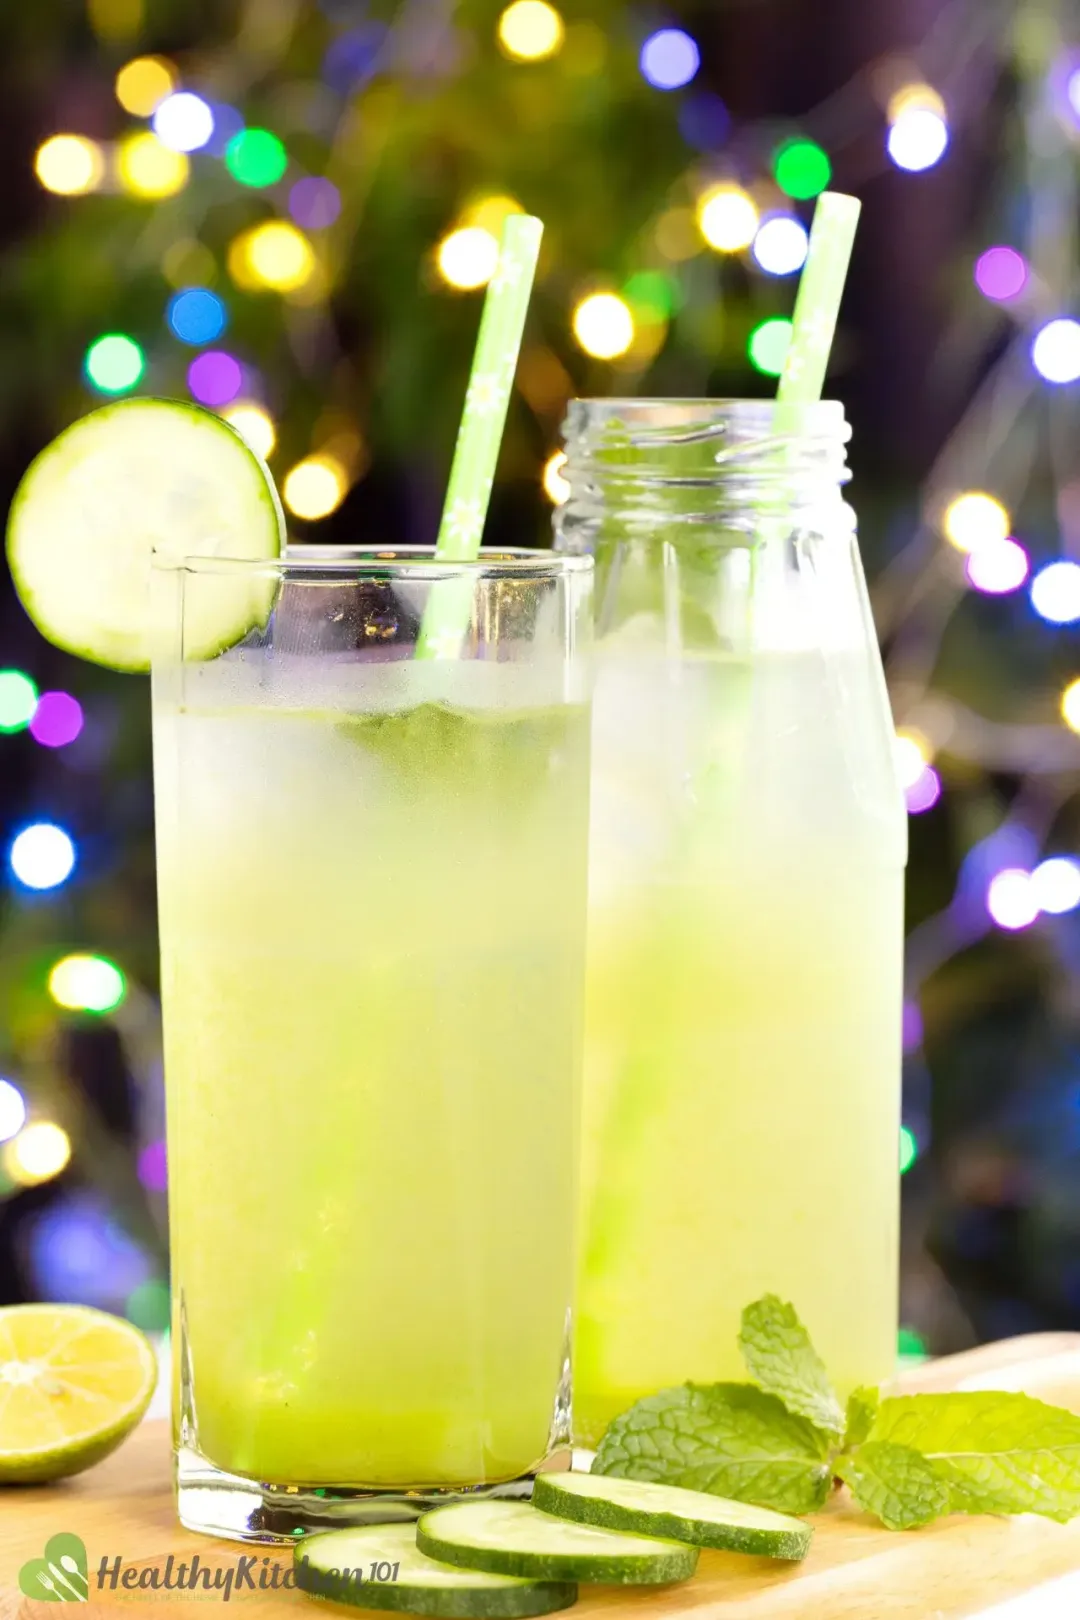 In front of Christmas trees with lights a glass of cucumber and lime juice next to some mints leaves, cucumbers slices, and a jar of drink